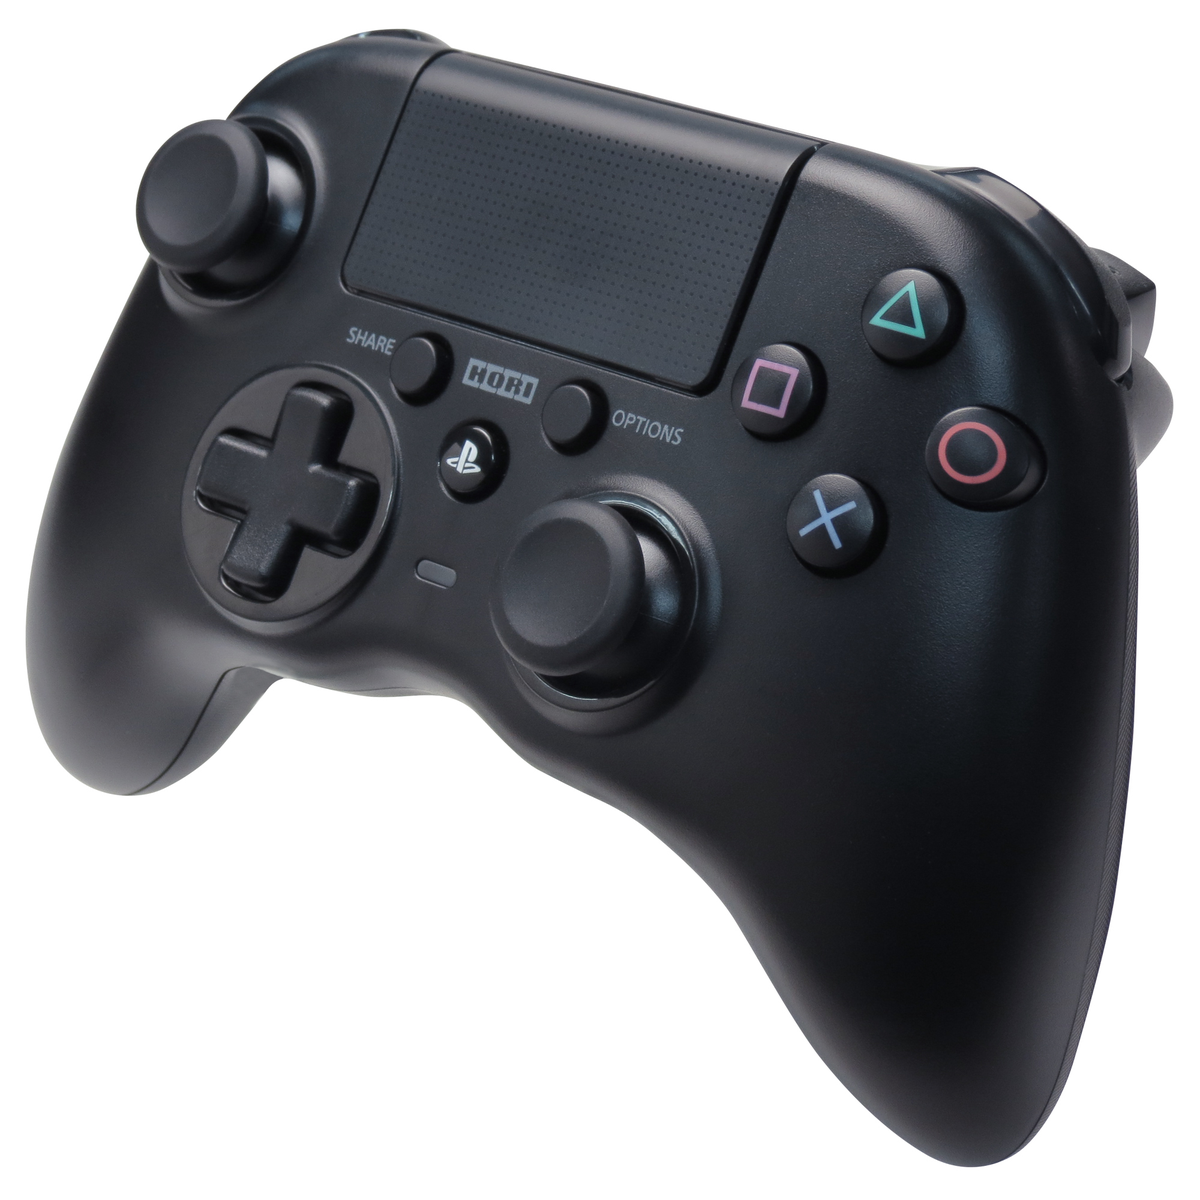 If you Xbox Controllers but own a PS4, Onyx pad is perfect for | VG247